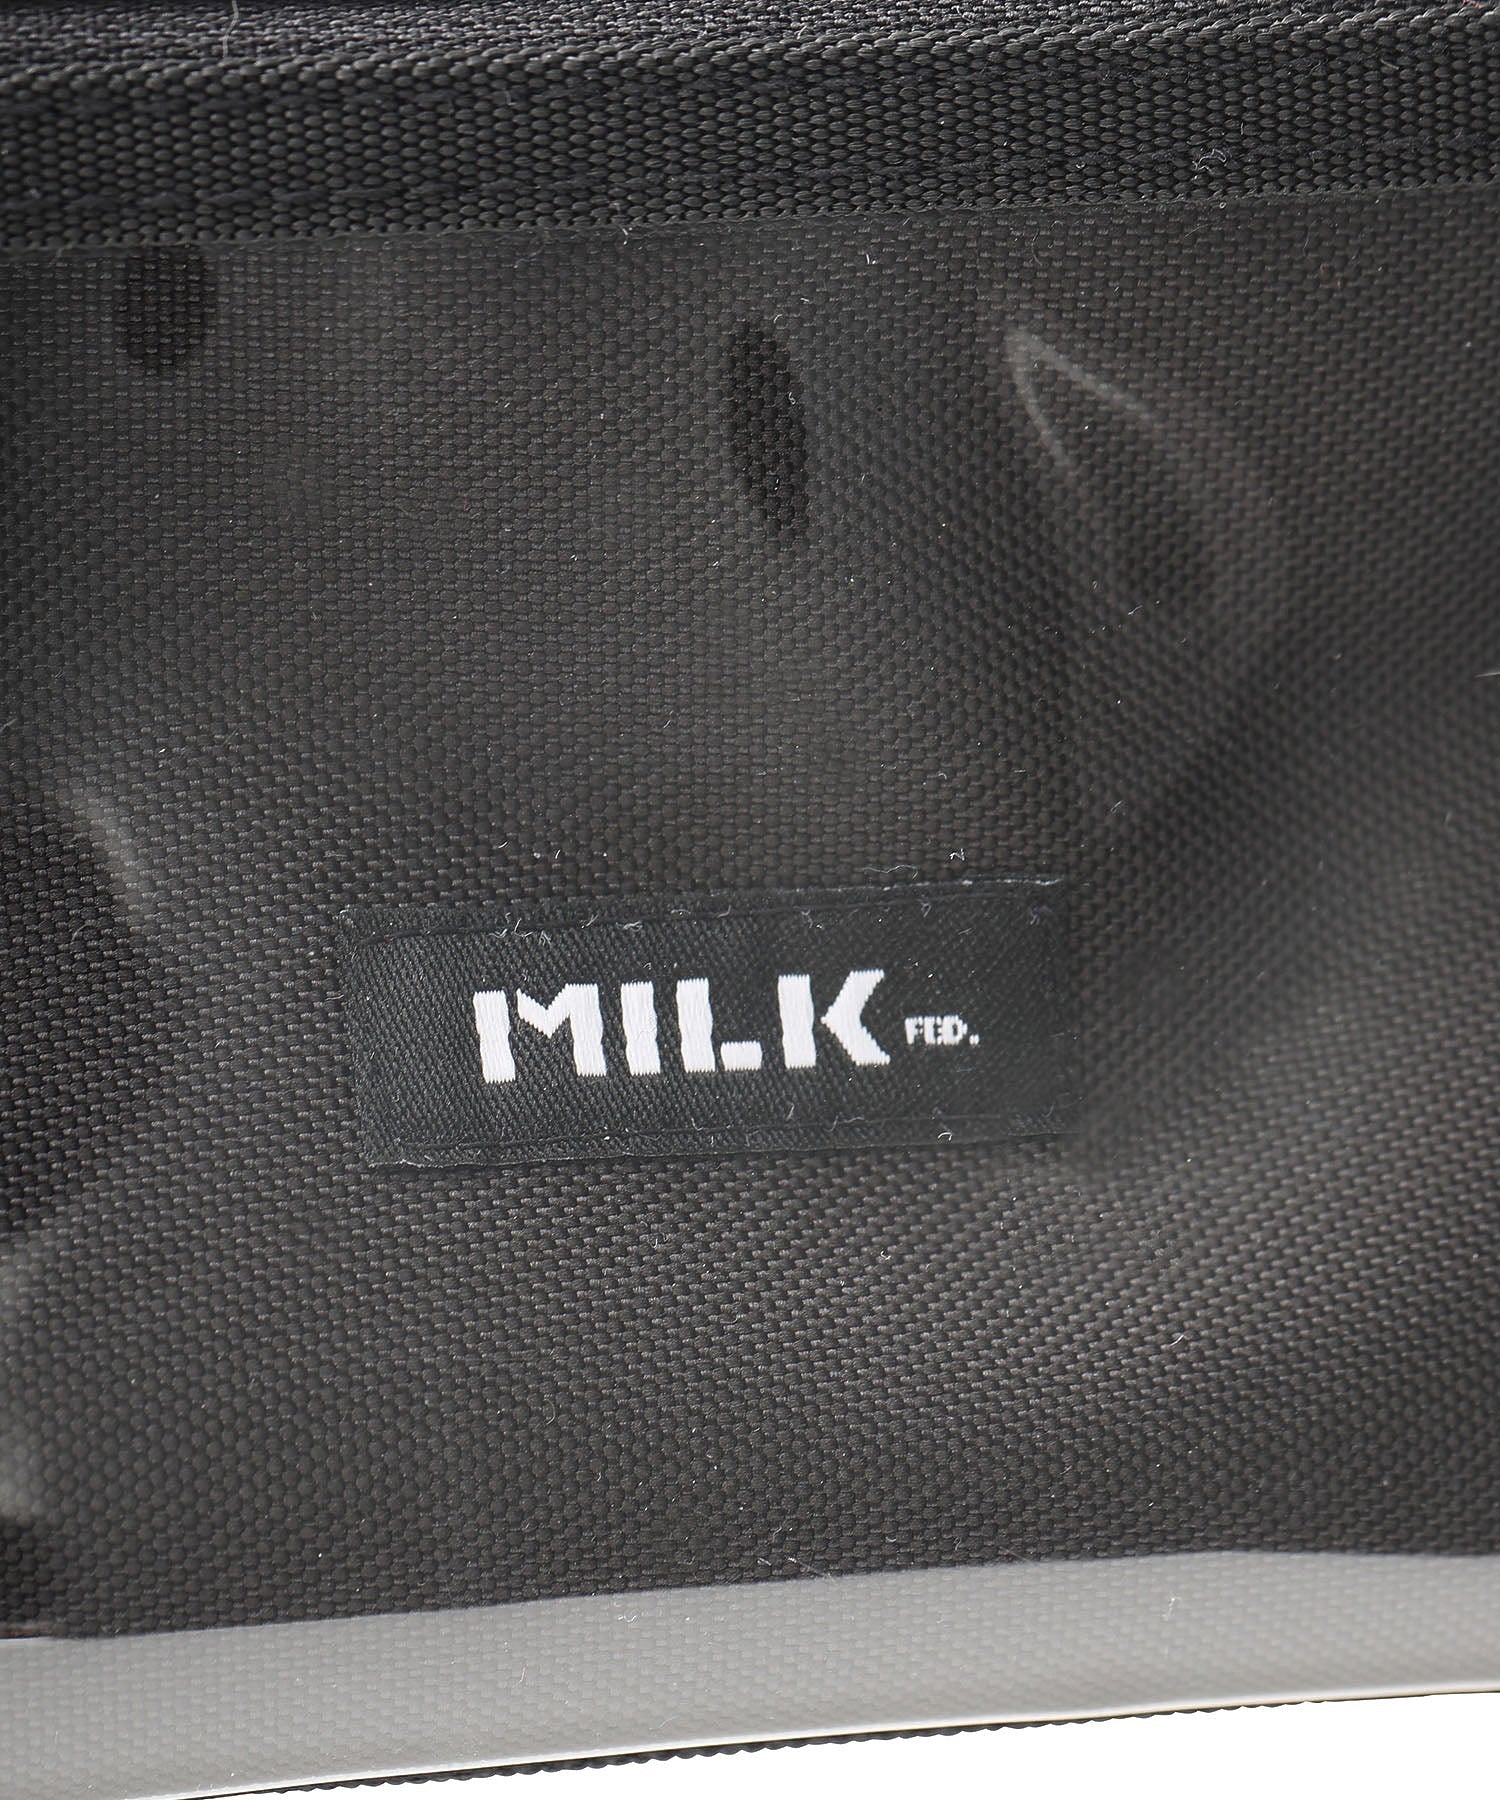 CLEAR POCKET POUCH MILKFED.